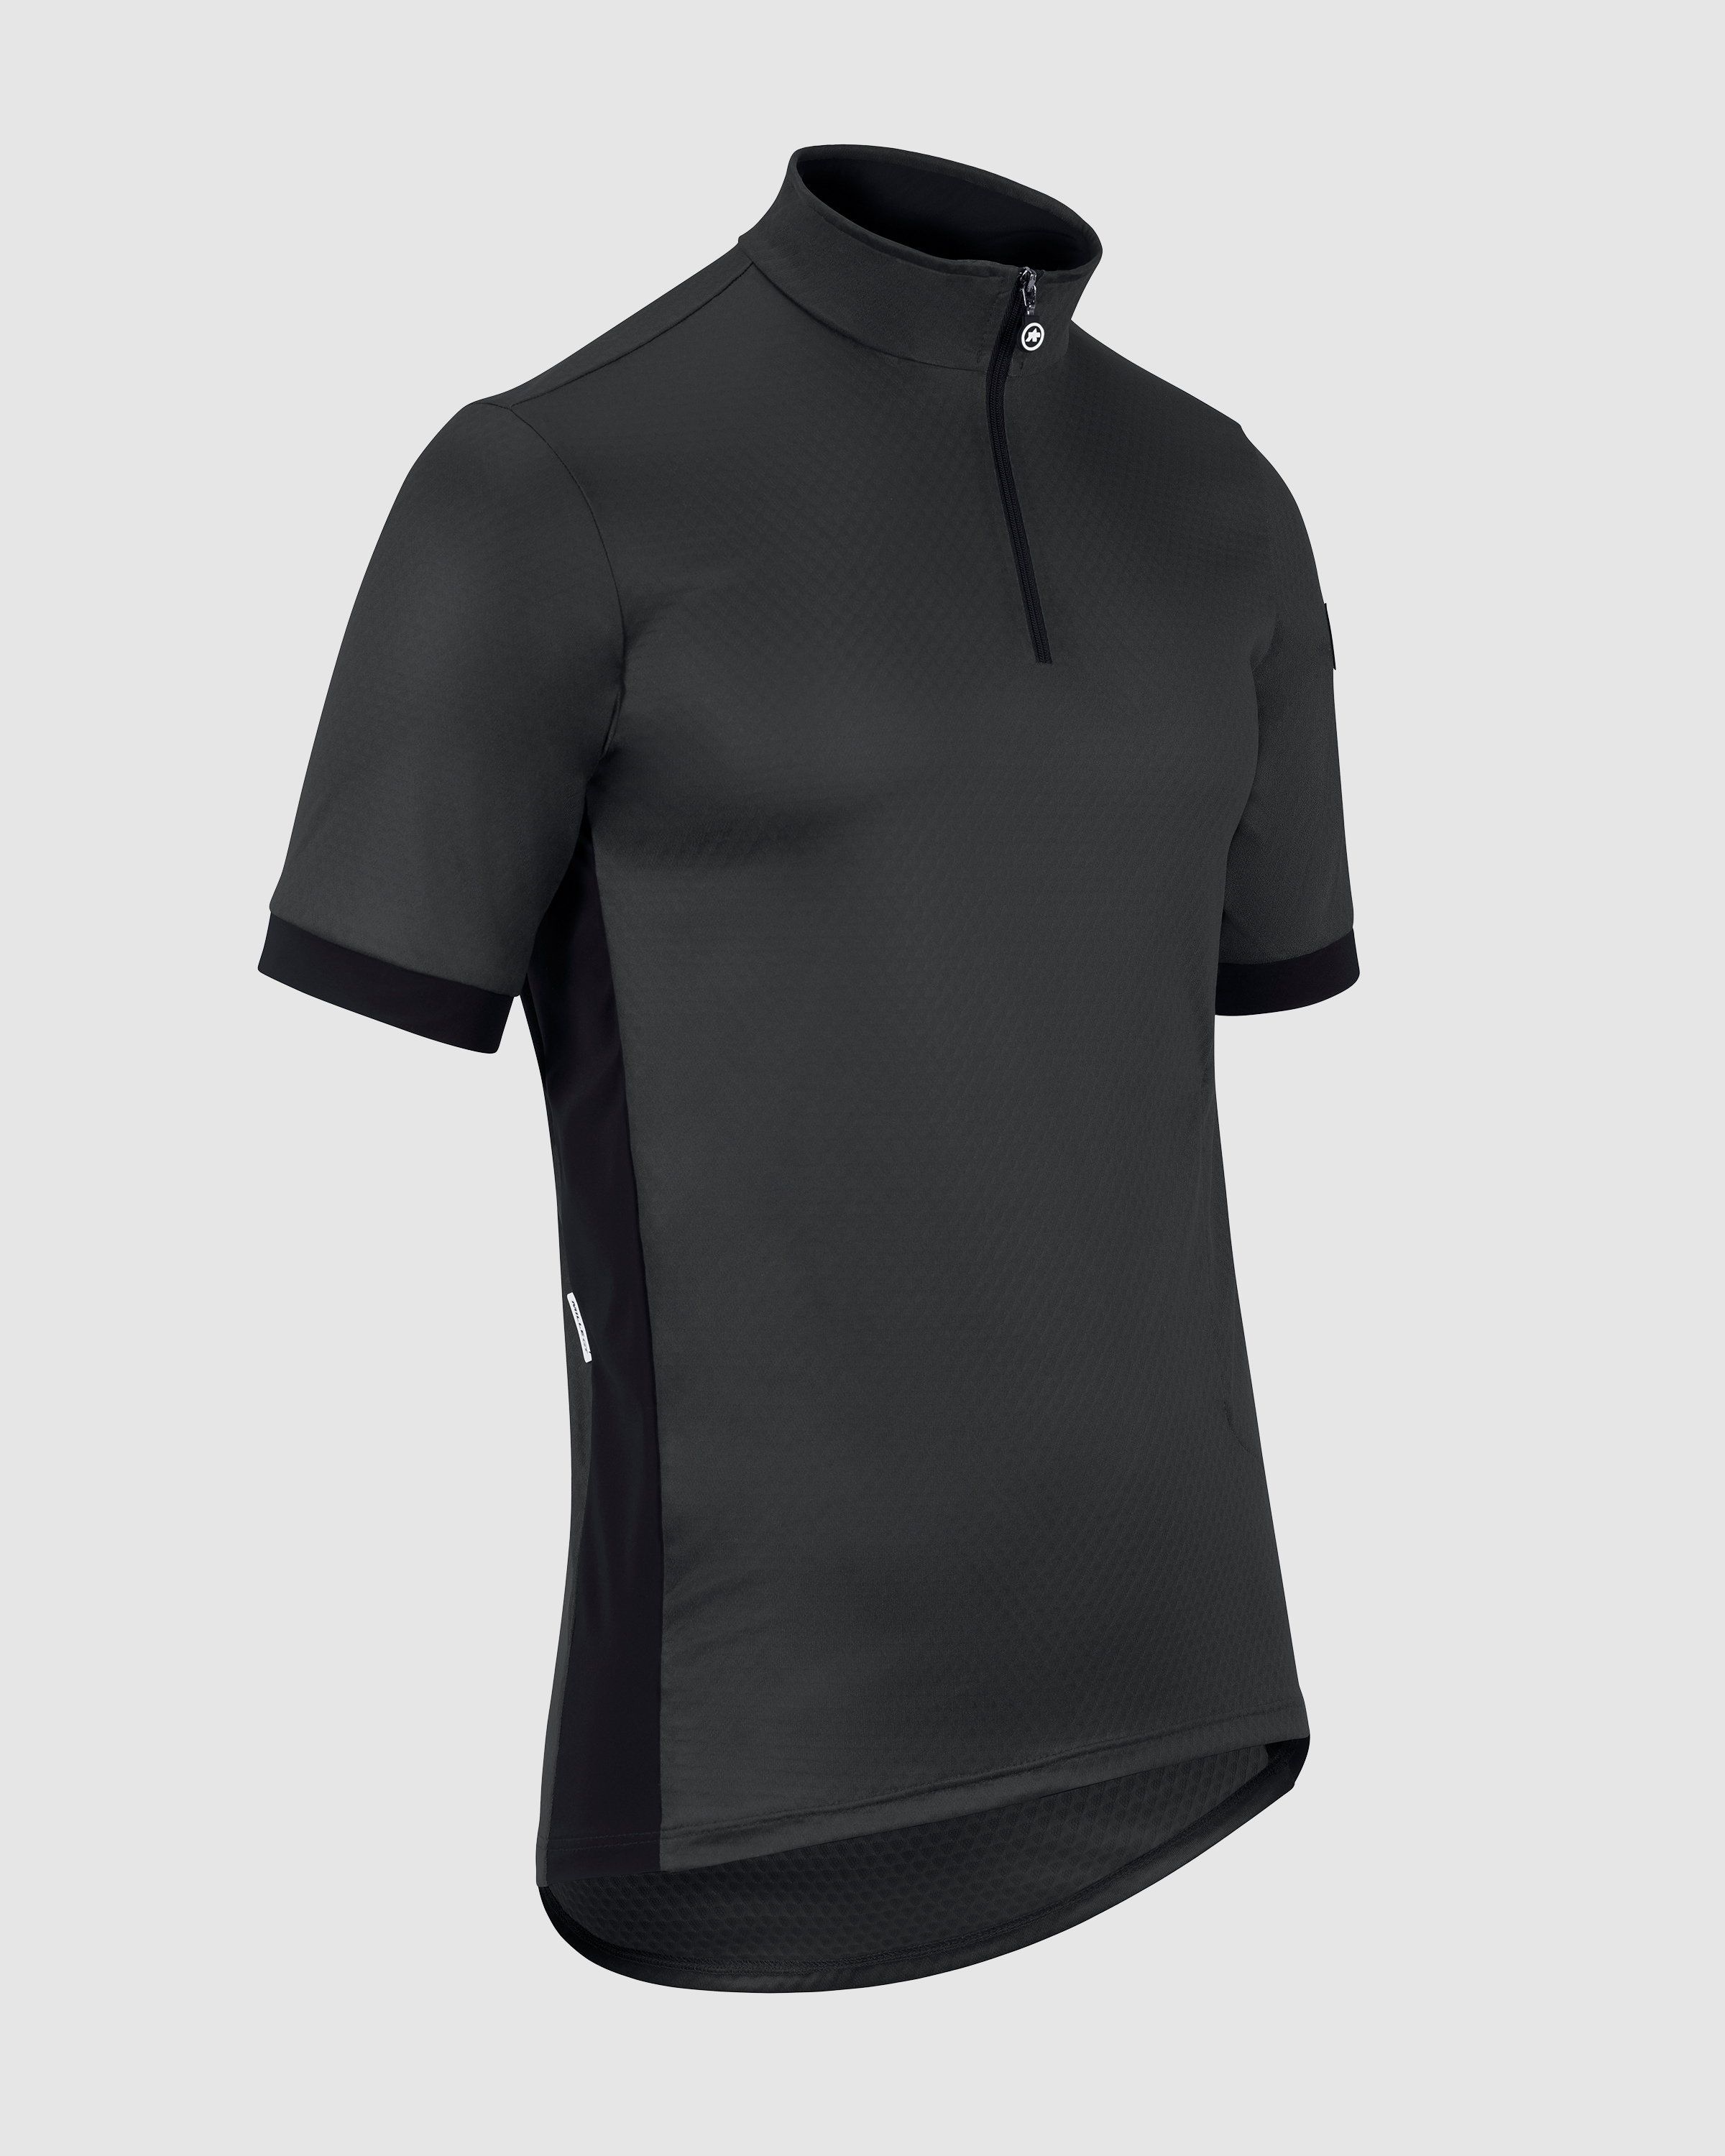 MILLE GTC Jersey C2 - ASSOS Of Switzerland - Official Outlet